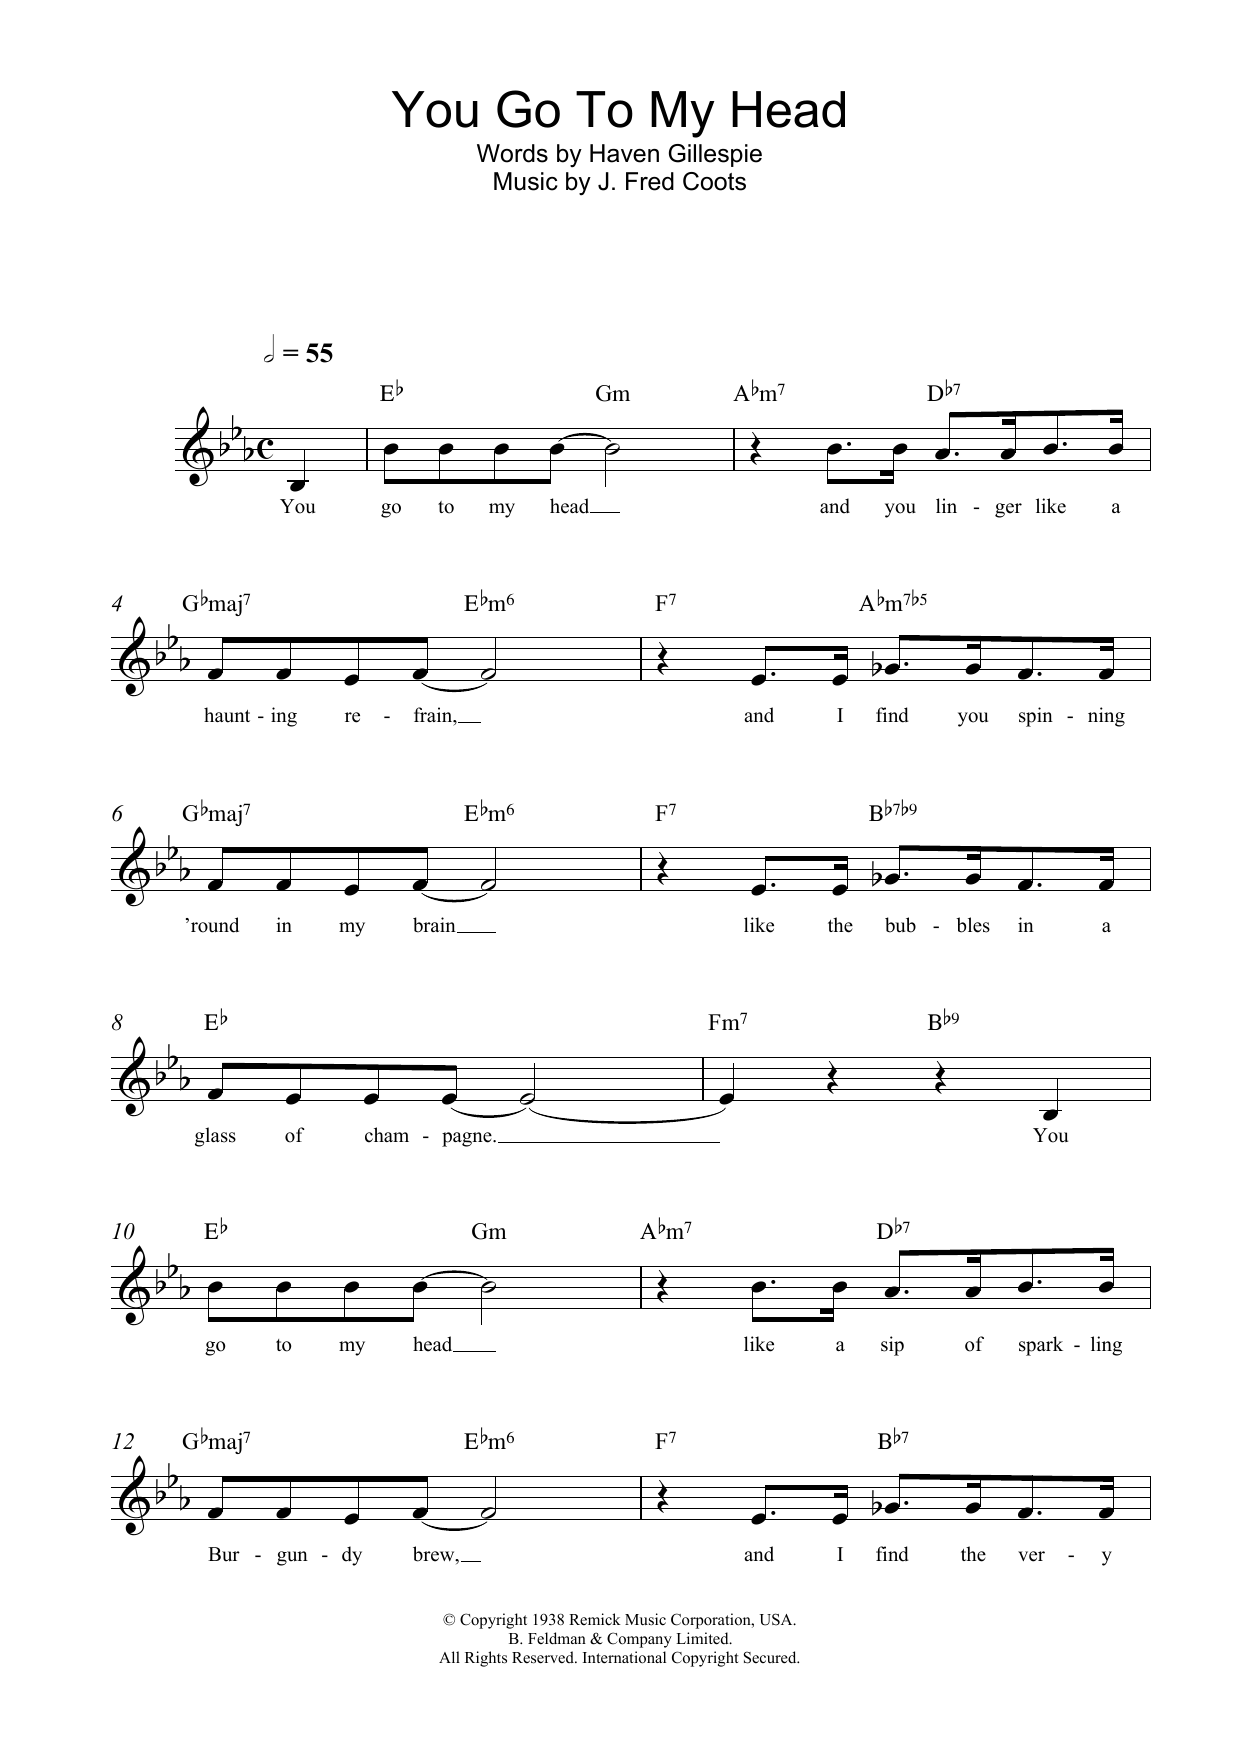 Download J. Fred Coots You Go To My Head Sheet Music